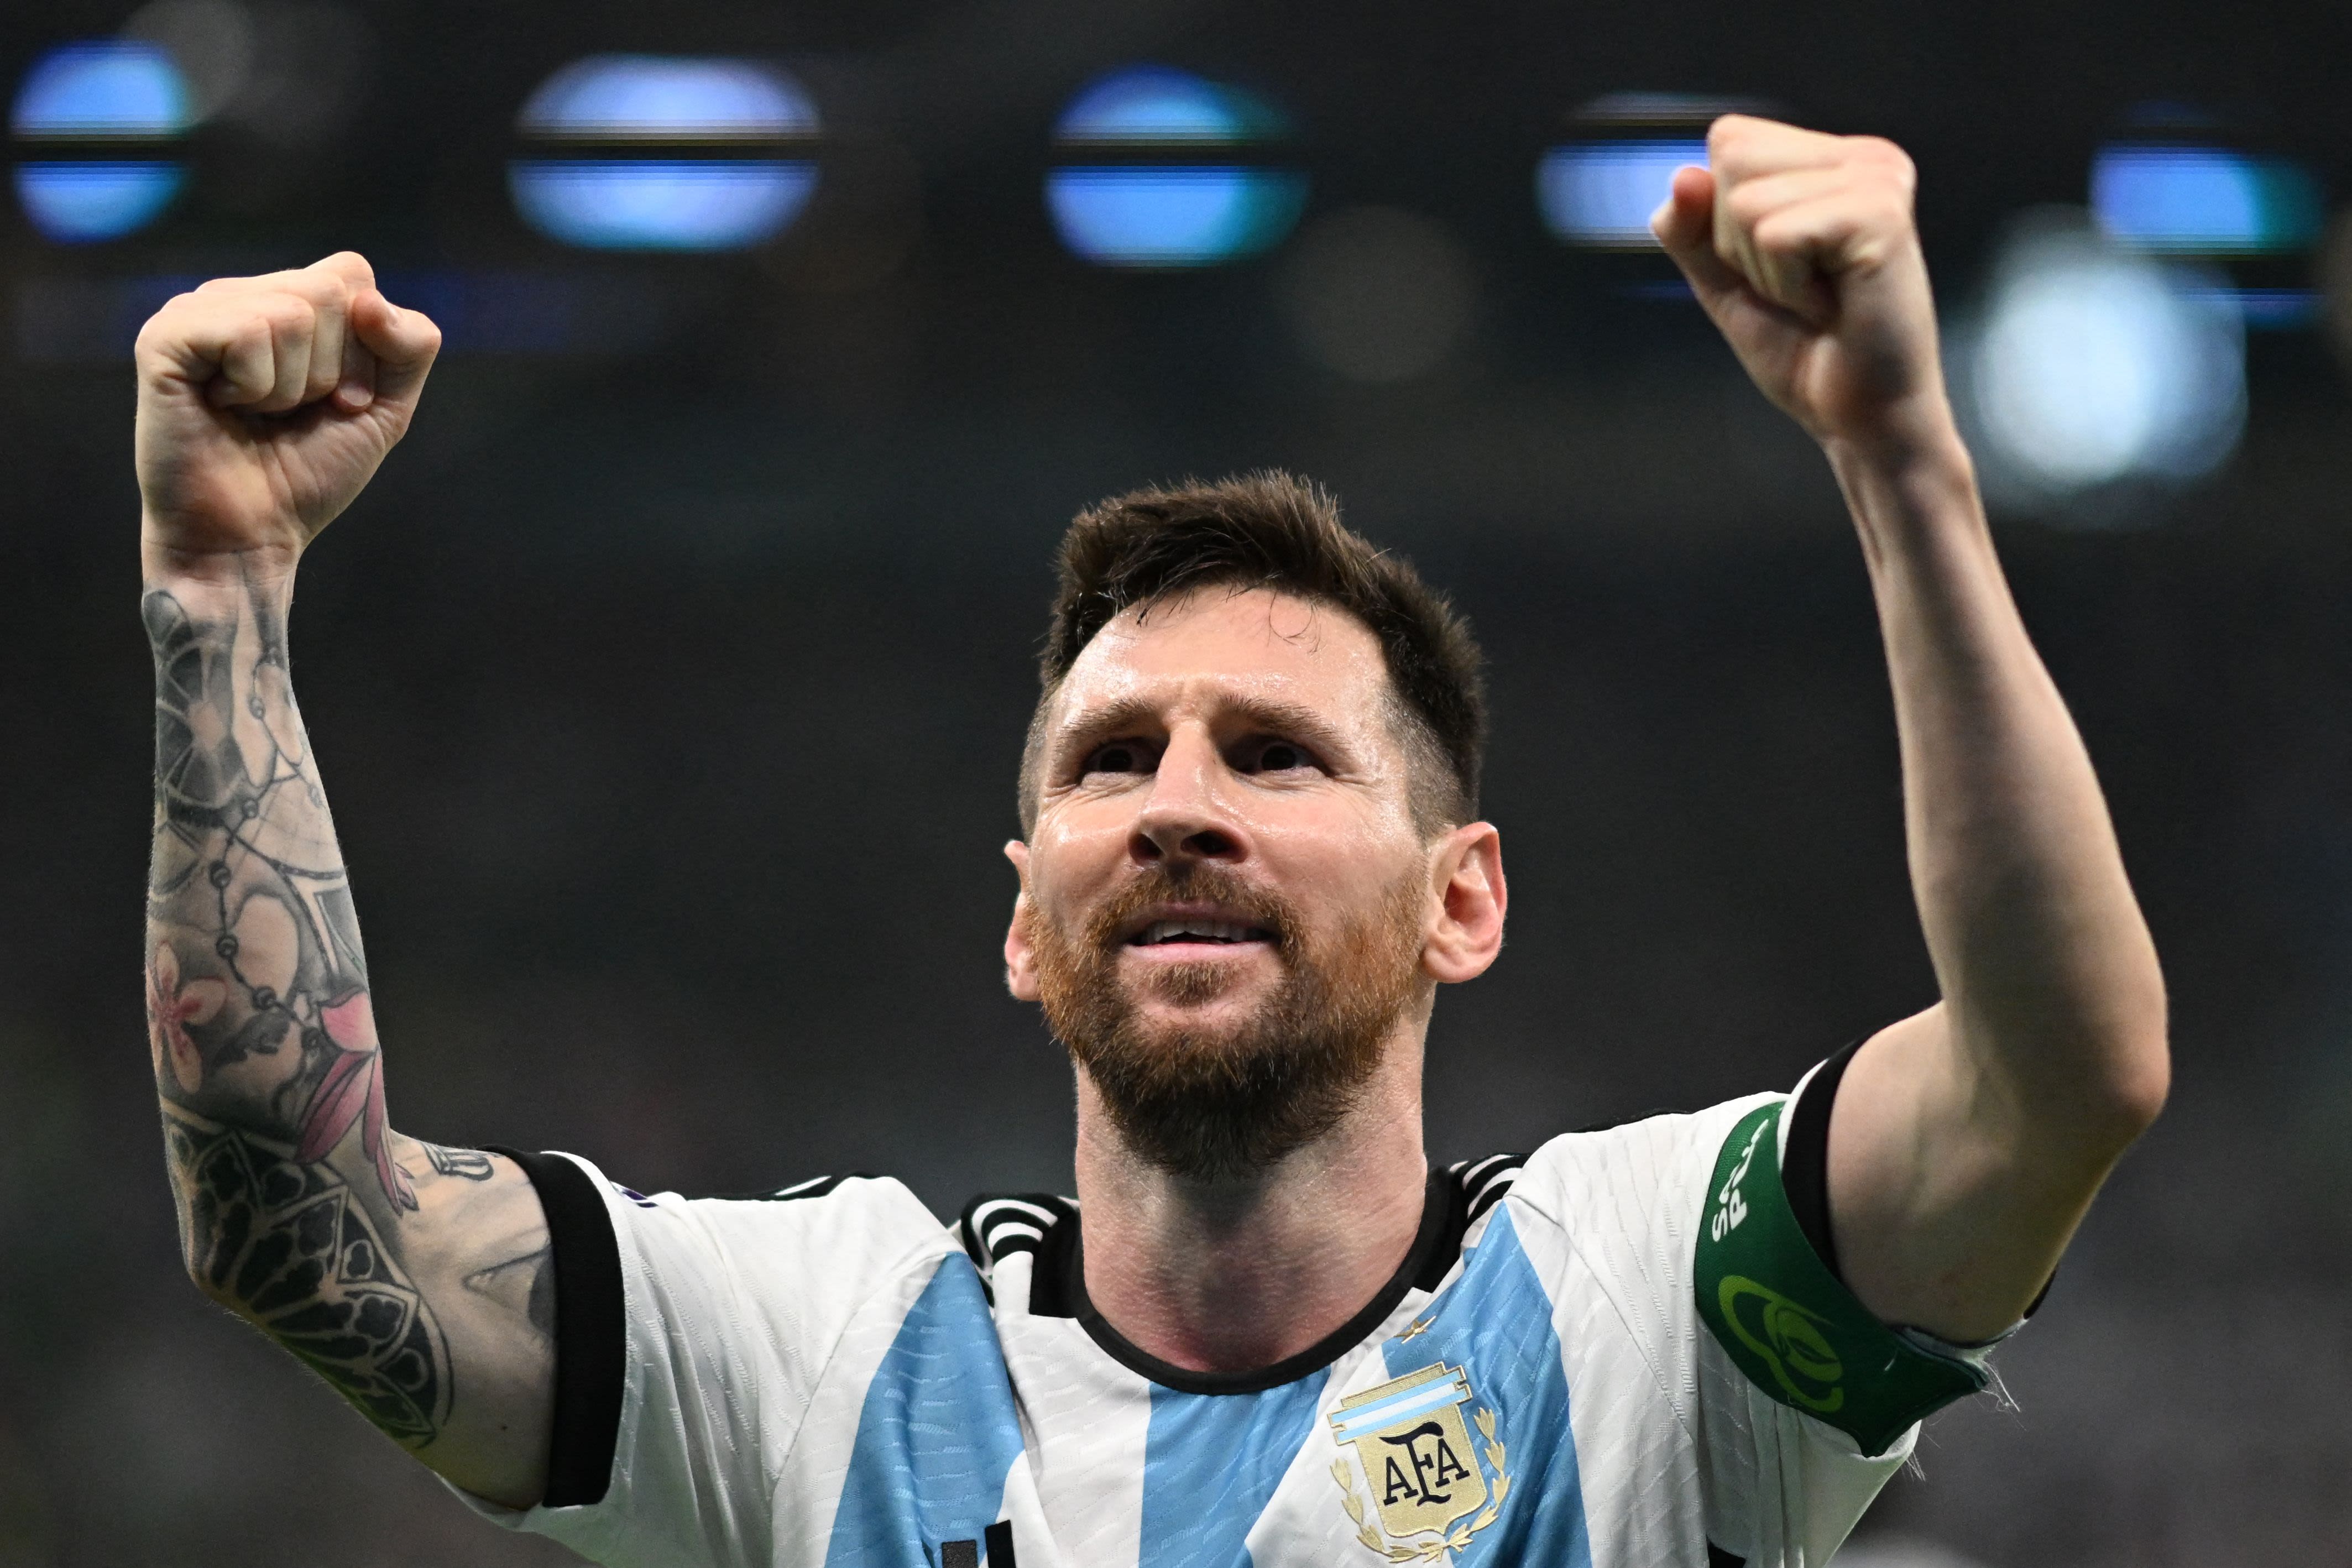 Lionel Messi helps keep Argentina’s World Cup hopes alive with moment of magic against Mexico